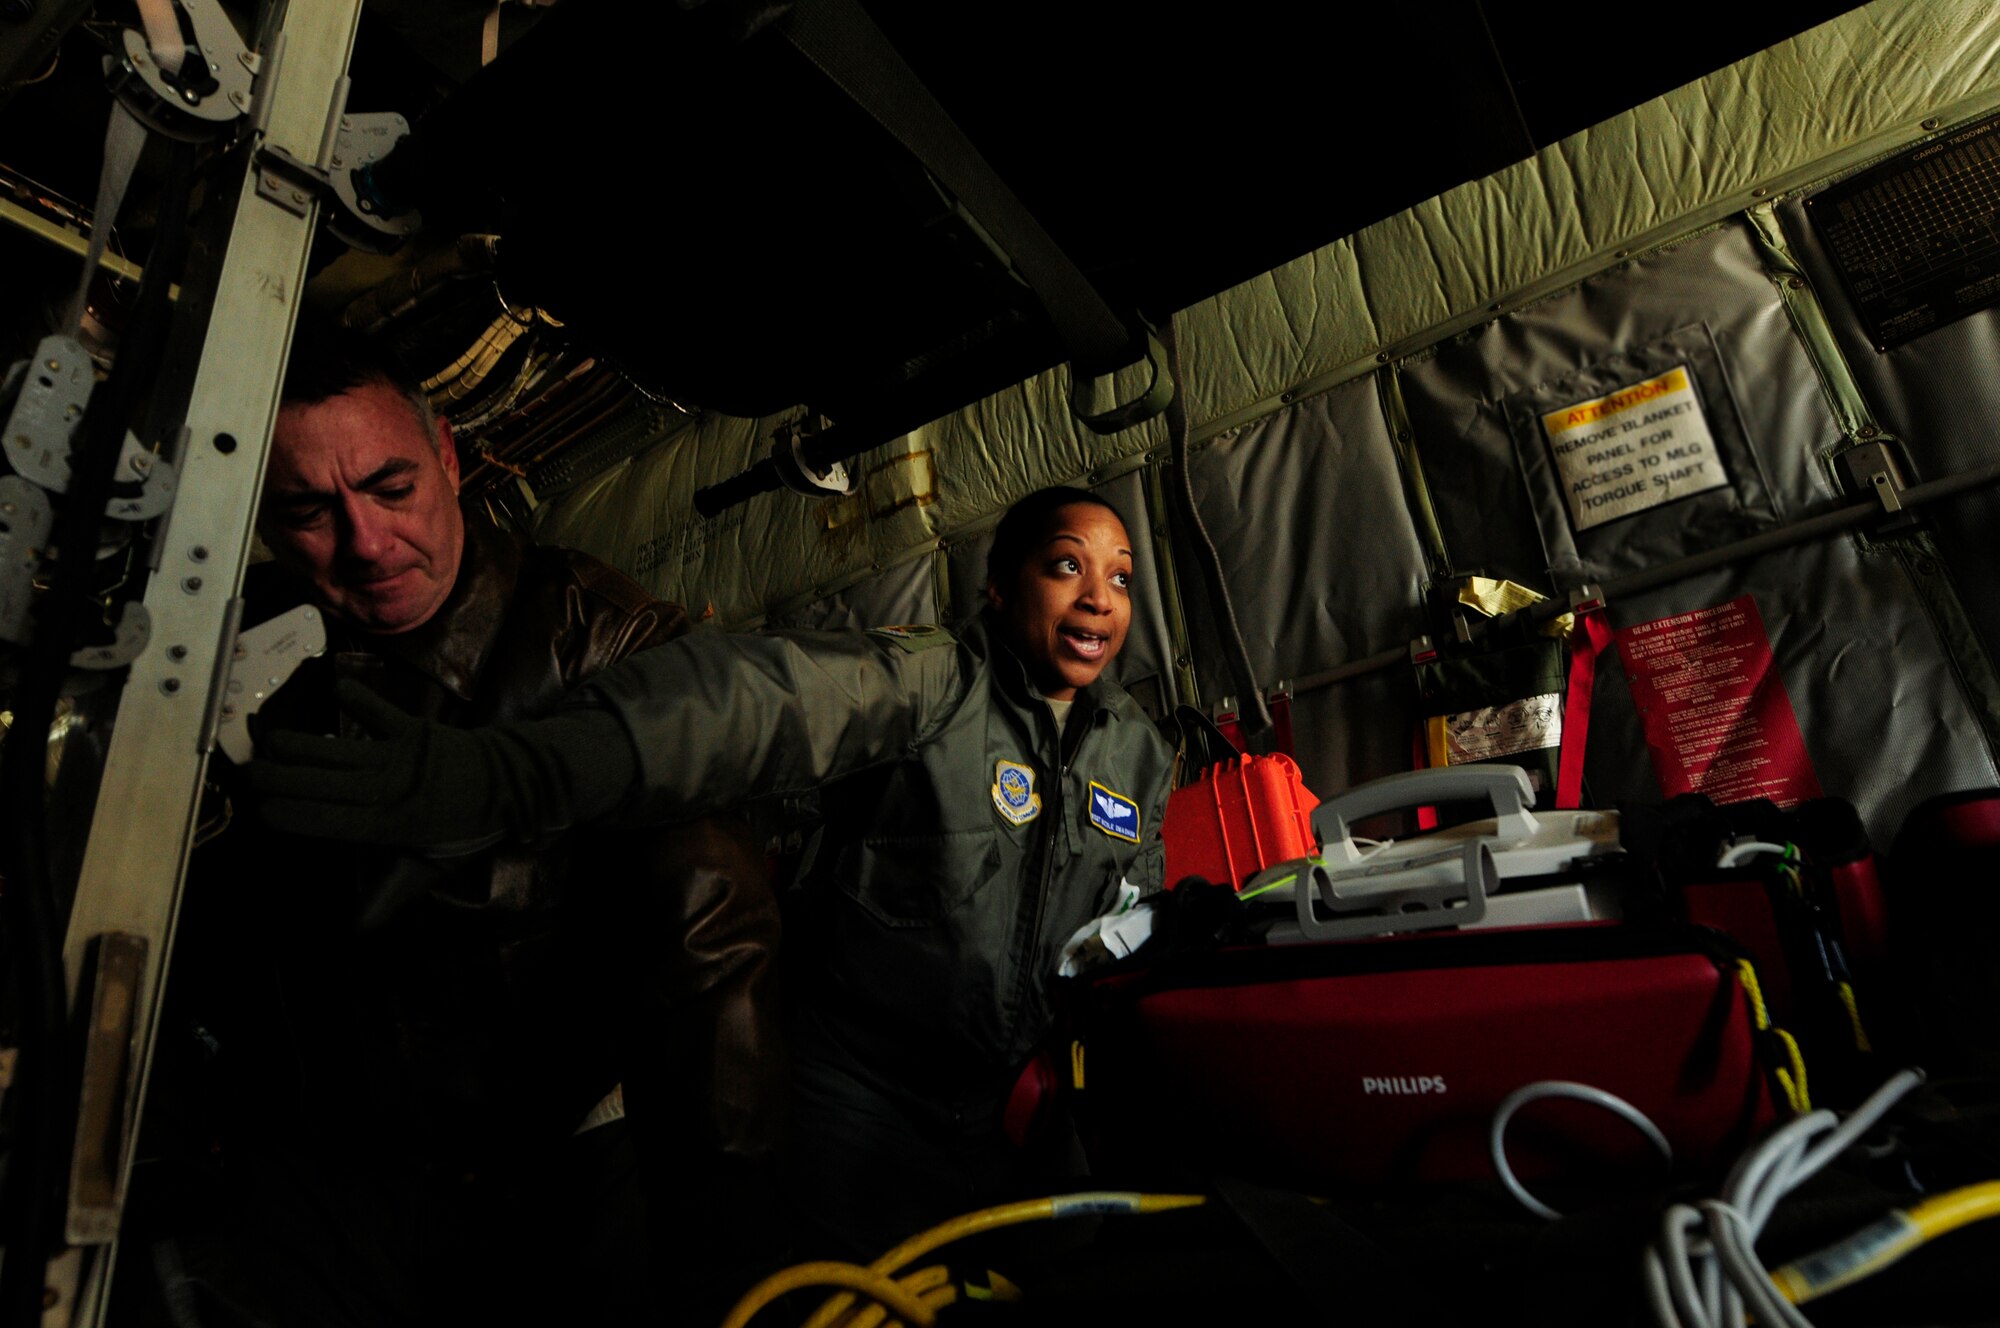 U.S. Air Force Master Sgt. Nicole Smashum, 156th Aeromedical Evacuation Squadron, directs the placement of litters while loading a C-130 Hercules aircraft as part of her chief medical technician duties during an aeromedical training mission at the North Carolina Air National Guard Base, Charlotte Douglas Intl. Airport, Jan. 9, 2015. The training mission scenario is to transfer patients from Landstuhl Medical Center, Germany, to Malcolm Grove Medical Center, Md. (U.S. Air National Guard photo by Staff Sgt. Julianne M. Showalter, 145th Public Affairs/Released)